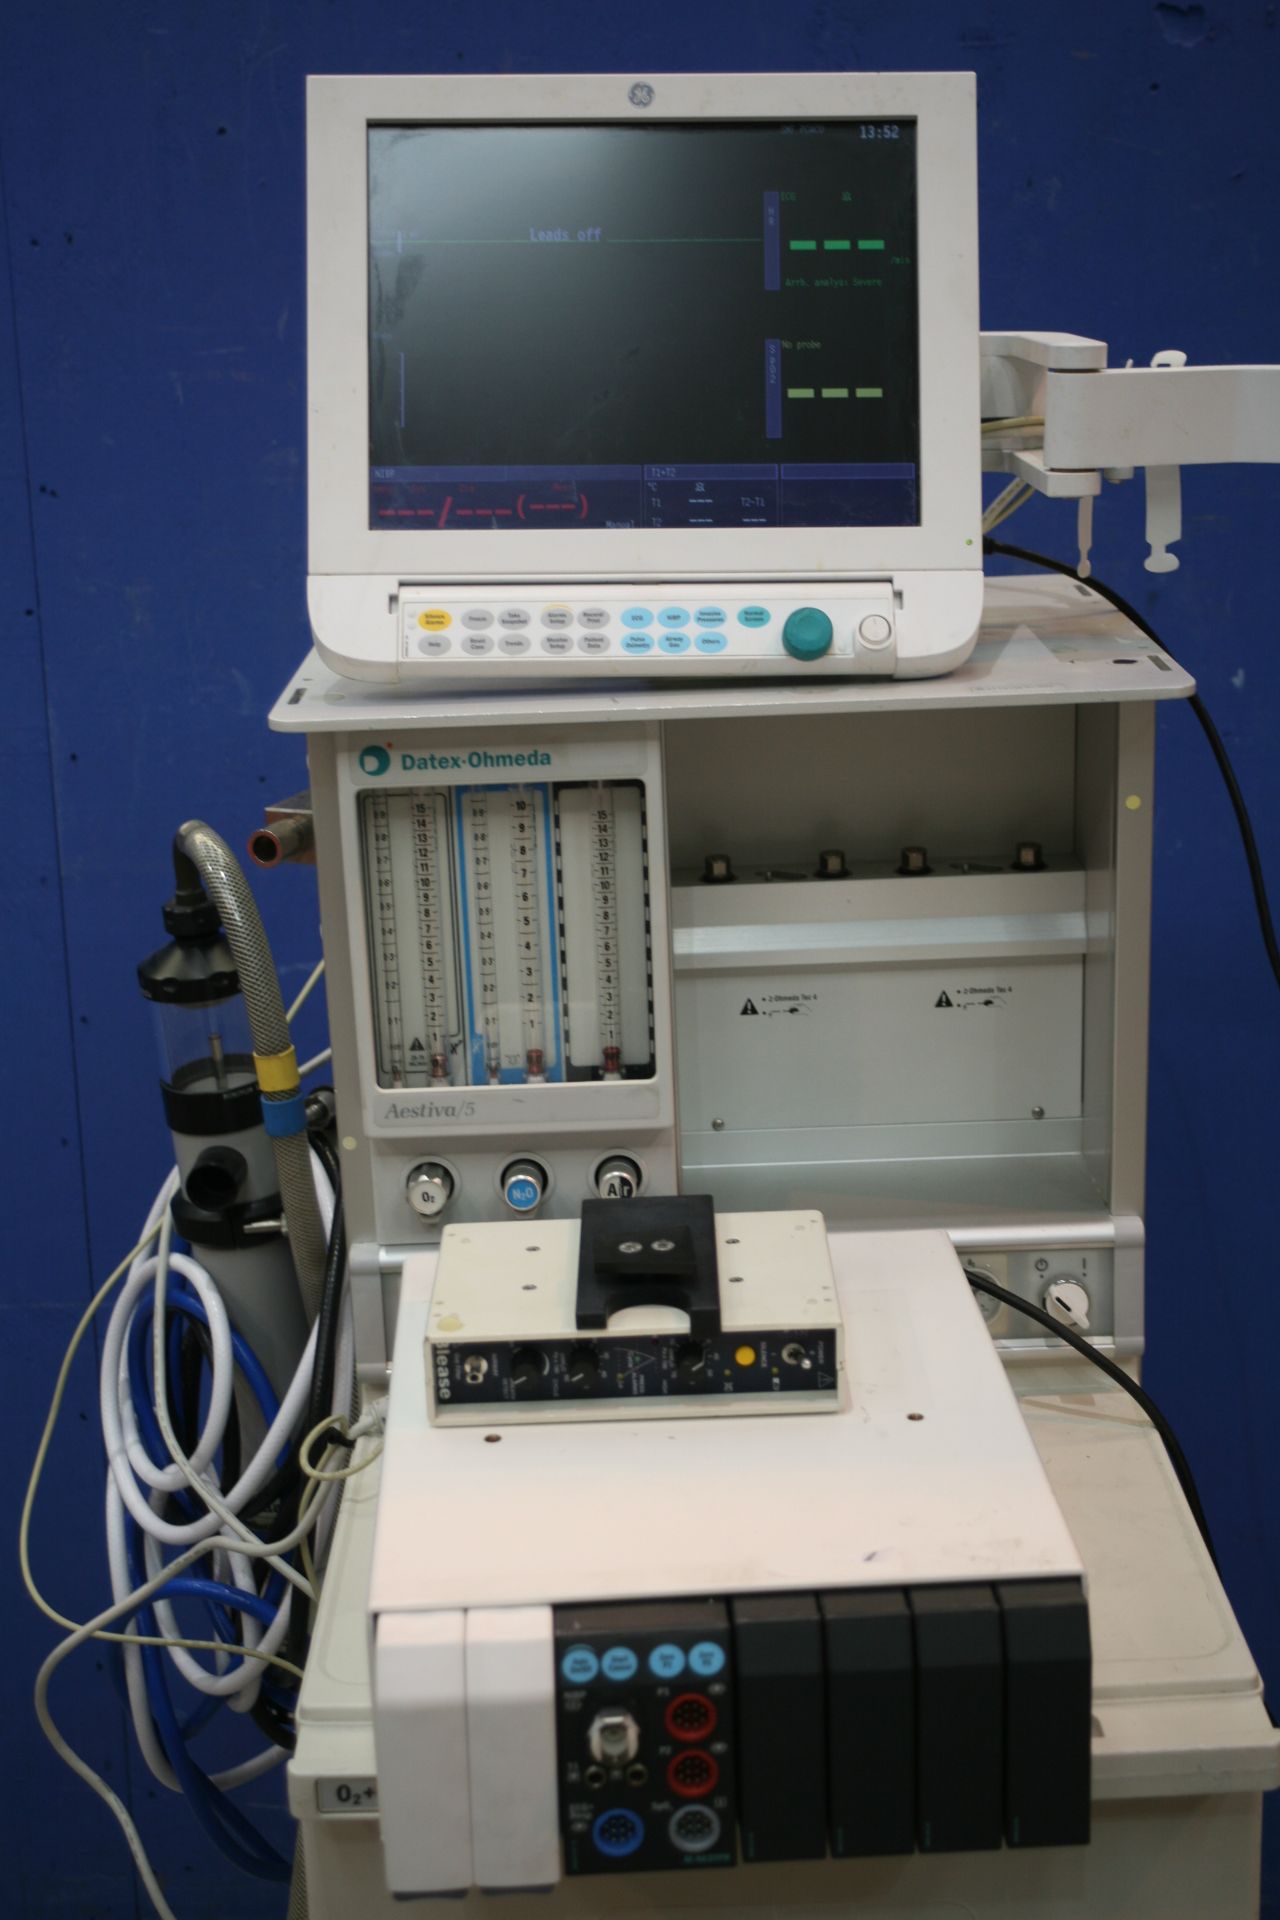 Datex Ohmeda Aestiva/5 Anaesthesia Trolley With Datex Ohmeda S/5 Monitor And Blease Alarm - Image 2 of 3